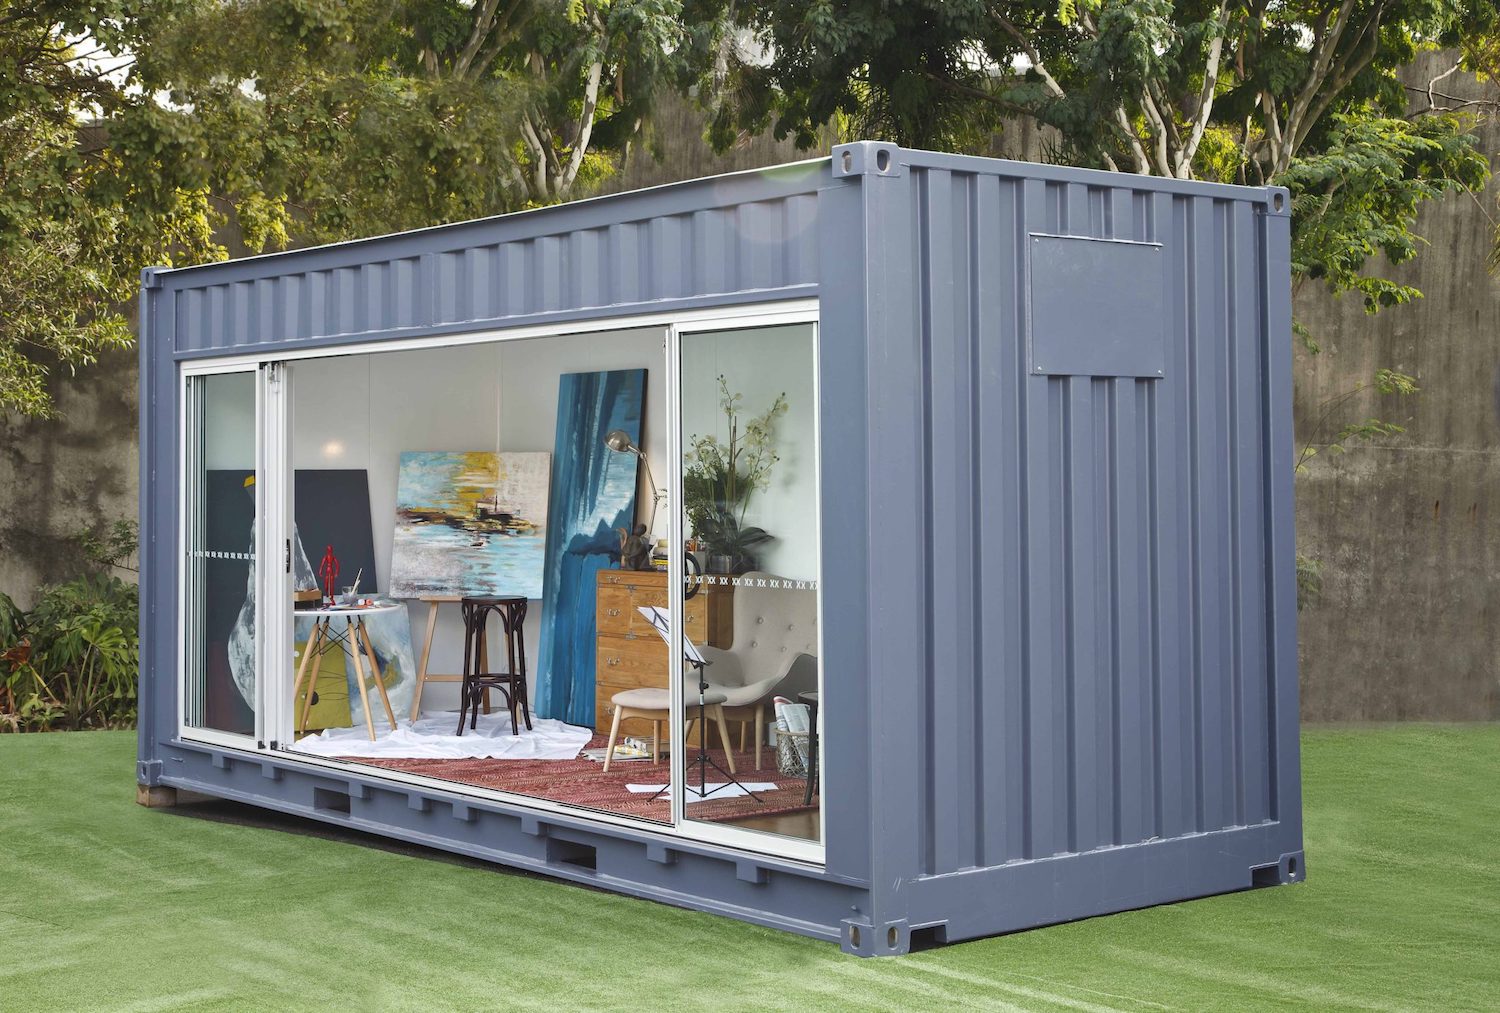 Shipping container studio